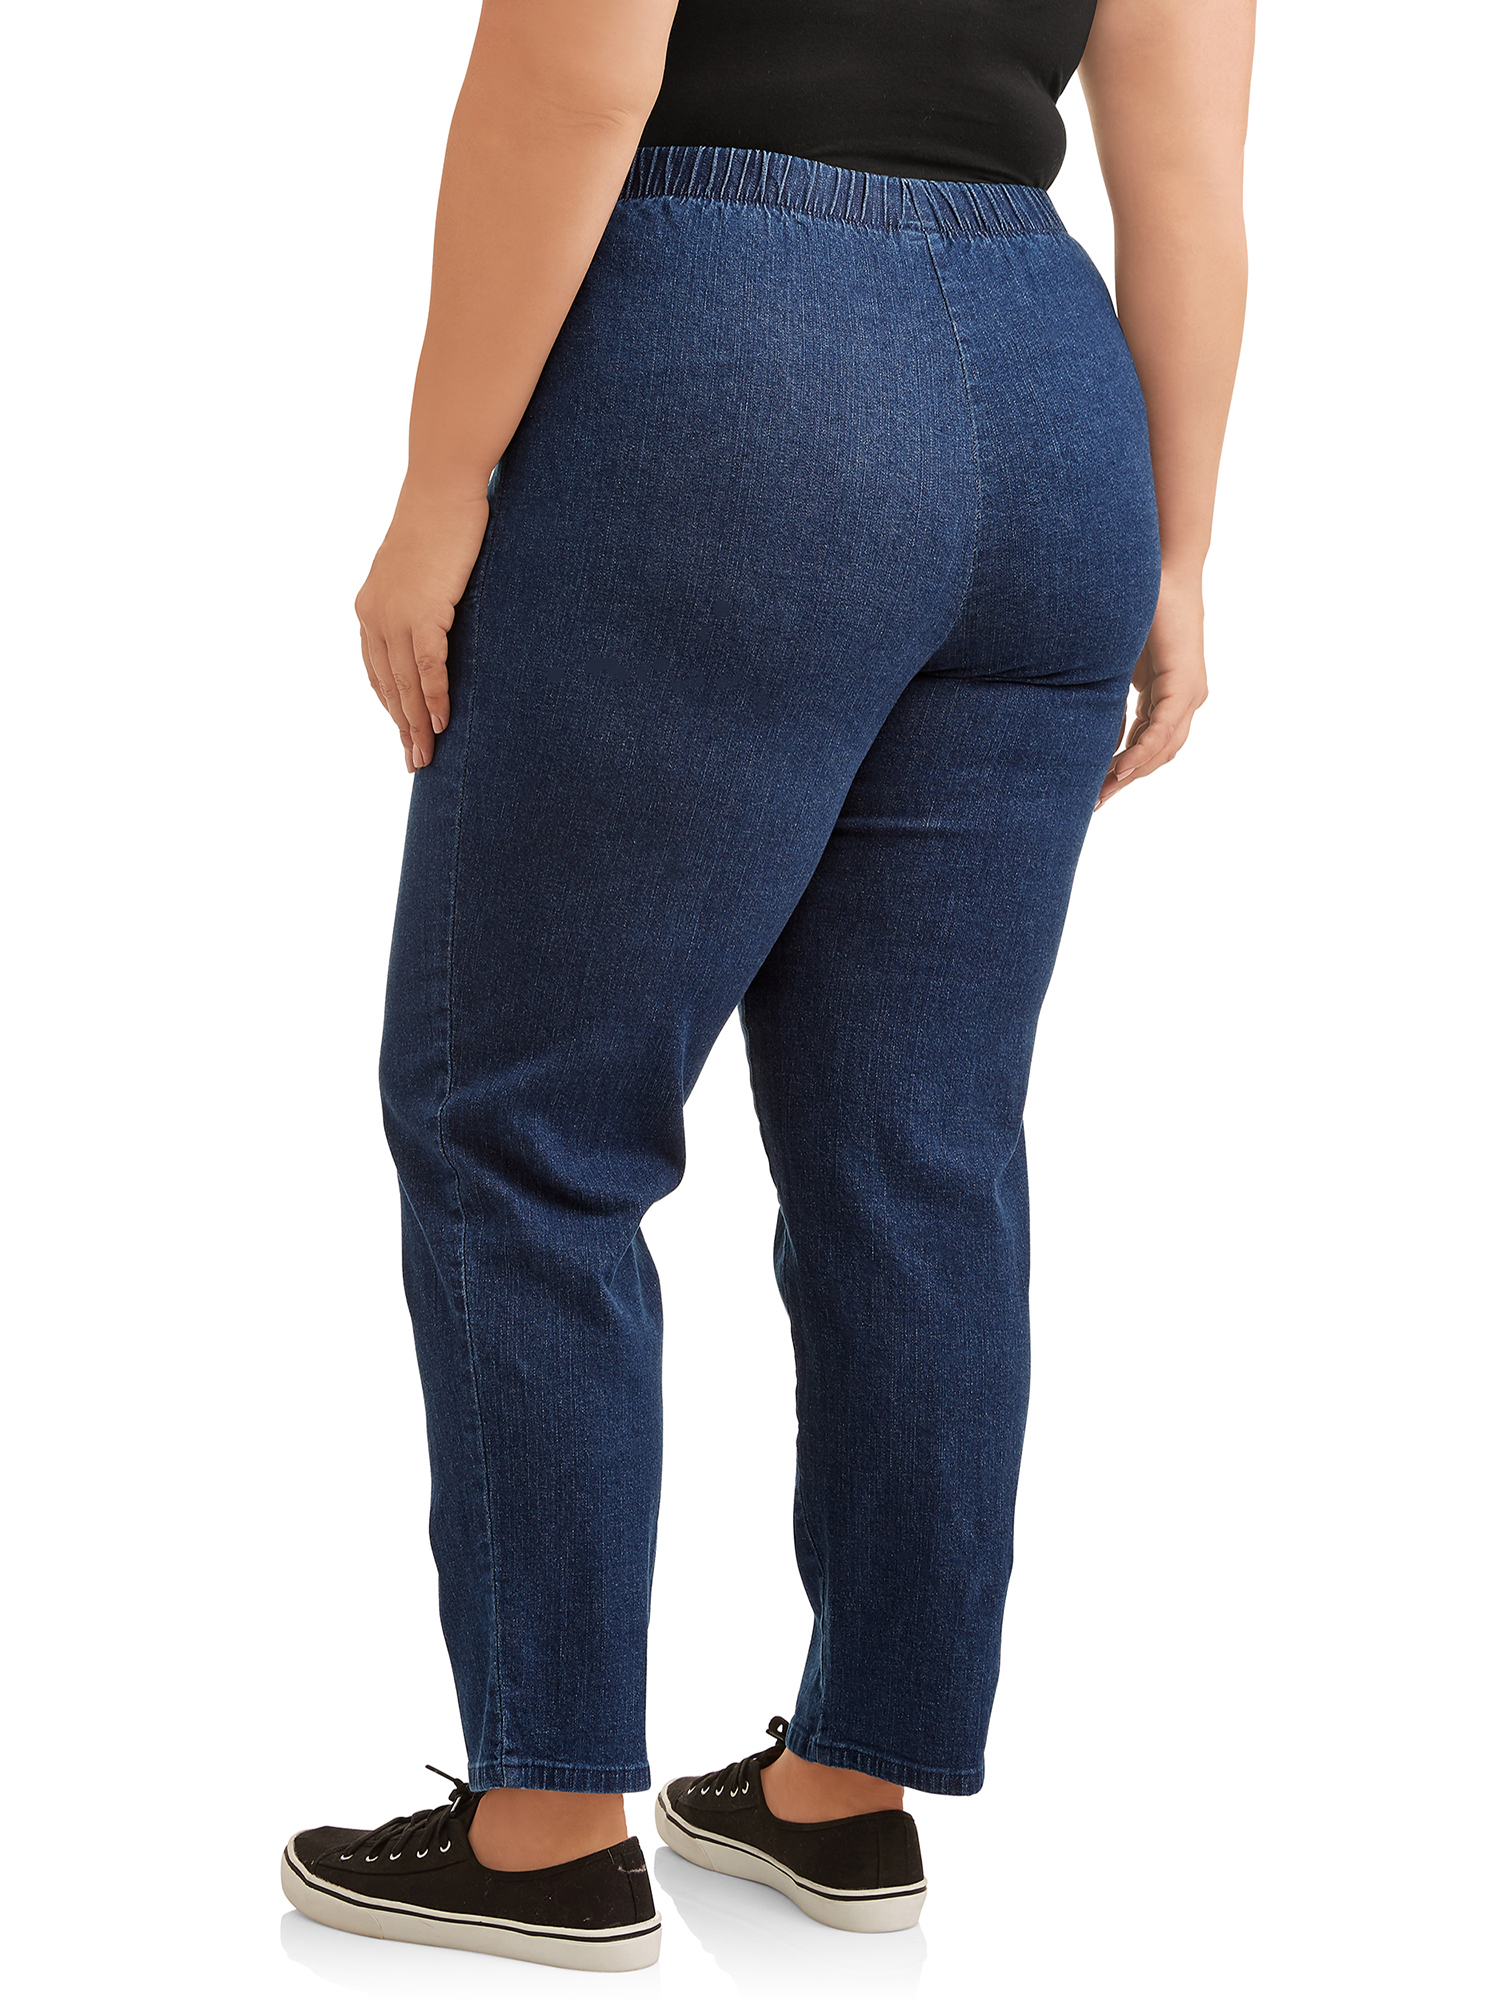 Just My Size Women's Plus Size 2 Pocket Pull On Pant, 2-Pack - image 3 of 8